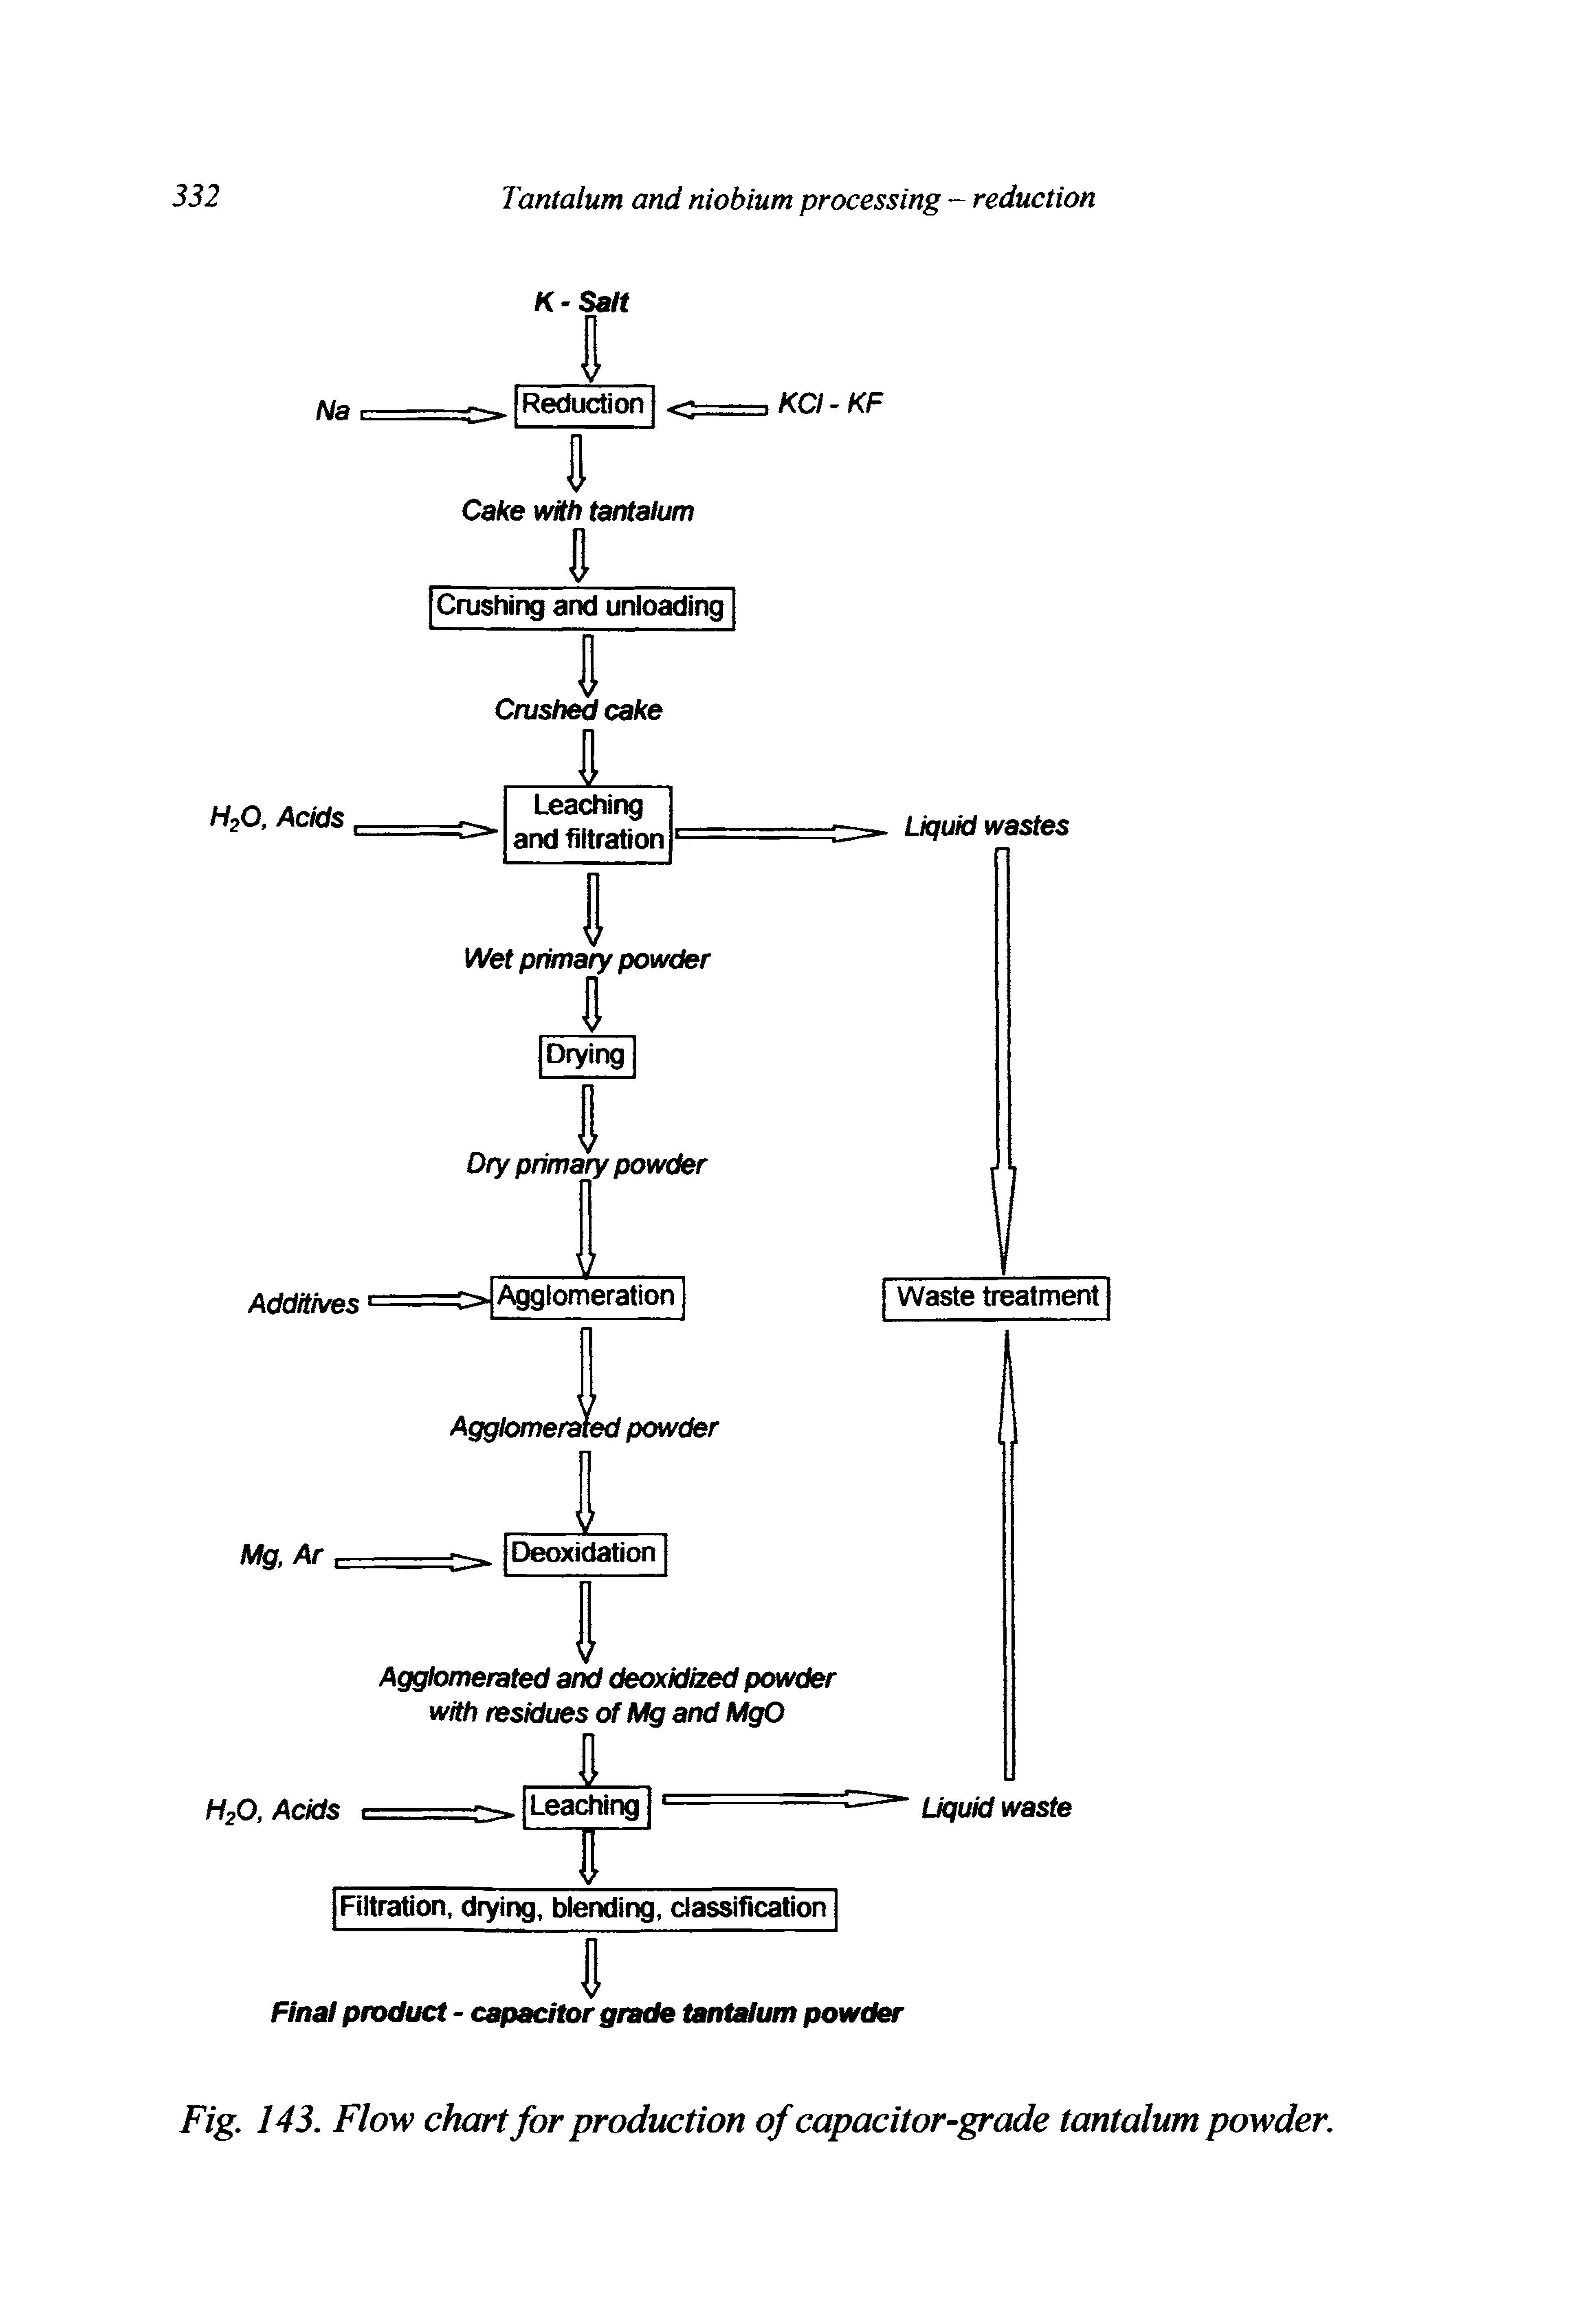 Fig. 143. Flow chart for production of capacitor-grade tantalum powder.